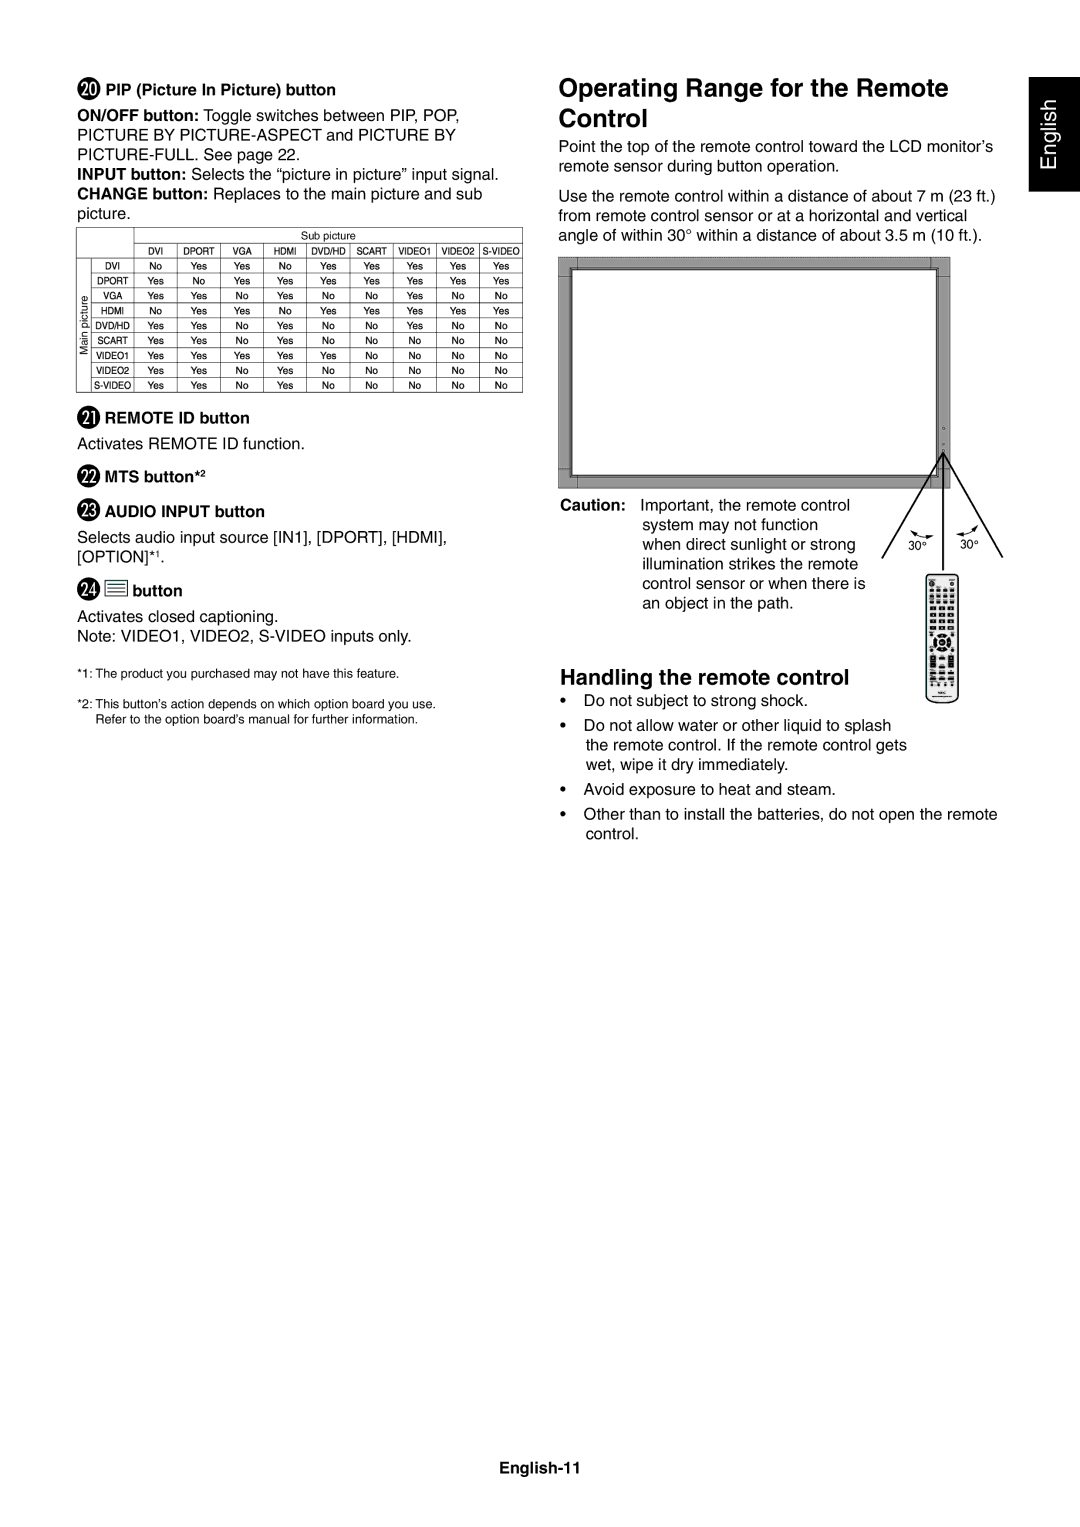 NEC V322AVT user manual Operating Range for the Remote Control, Handling the remote control 